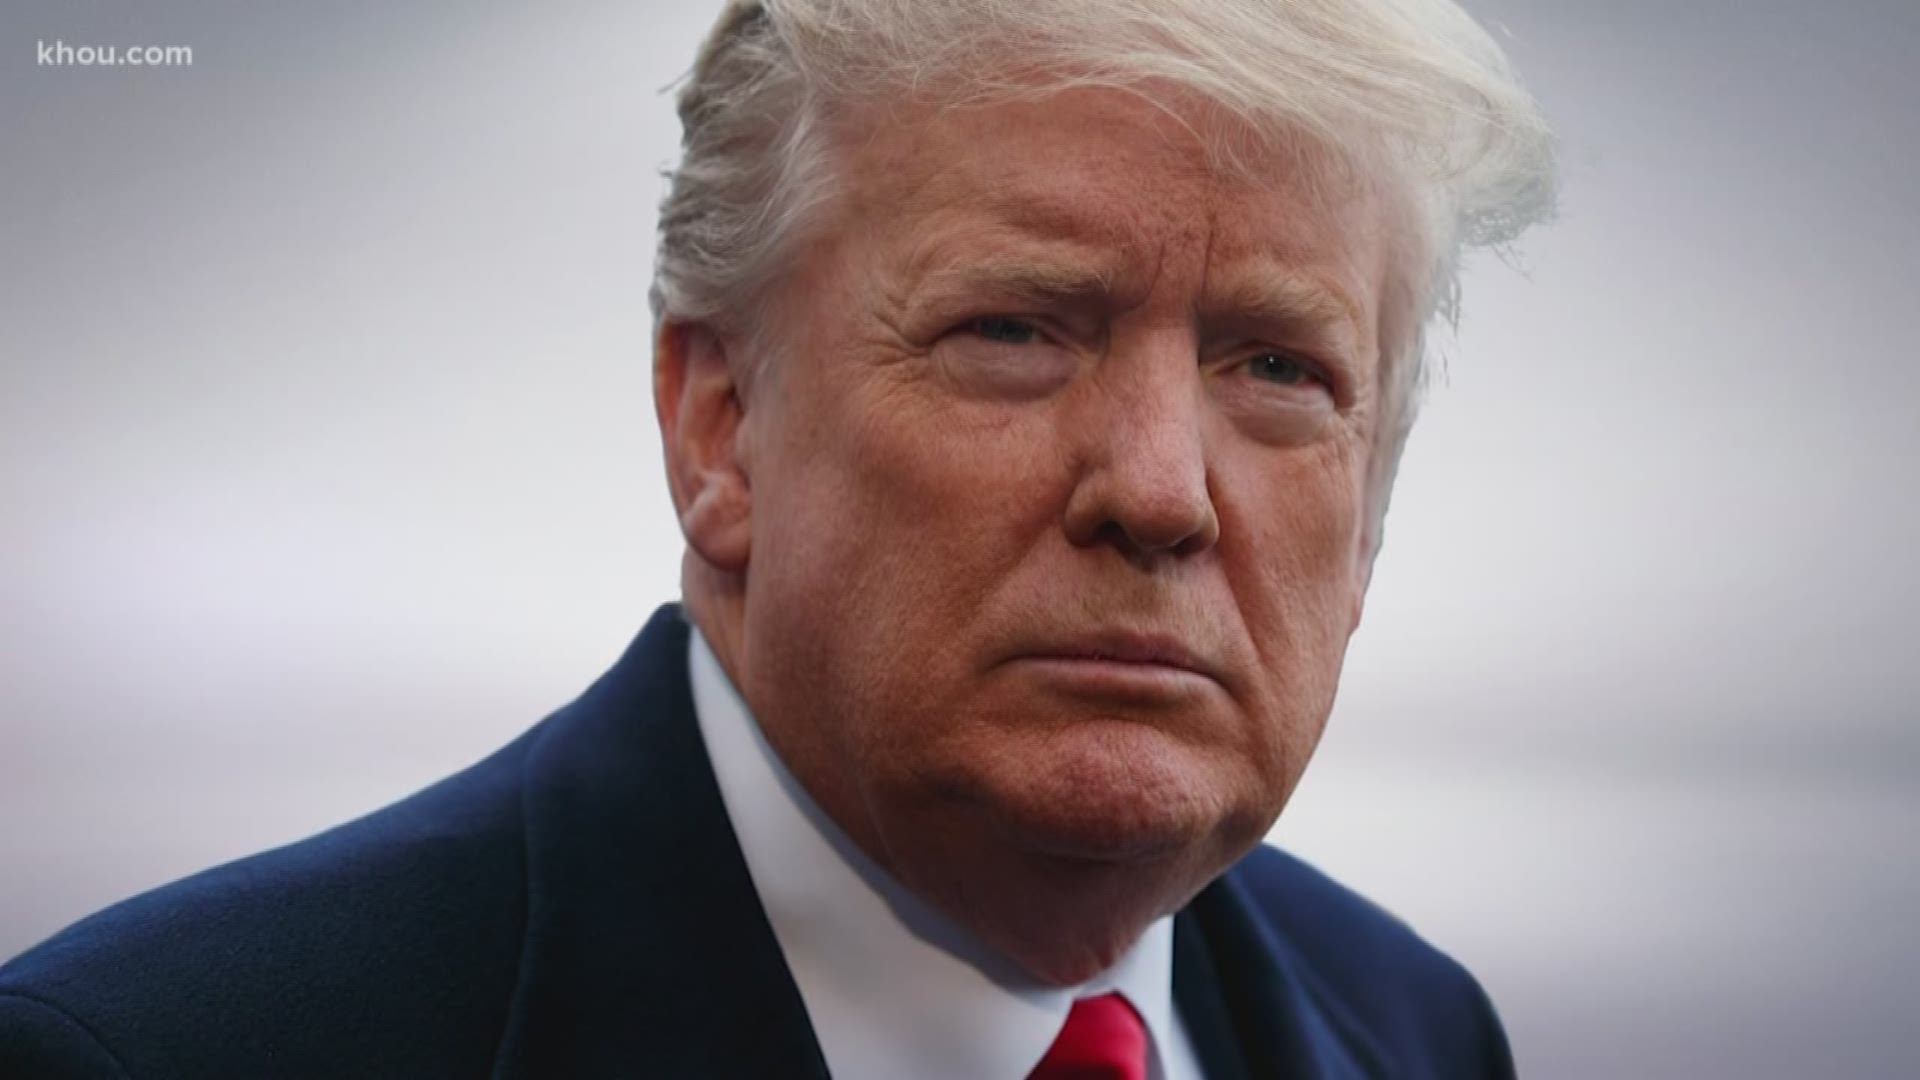 According to one political expert, a lot of political norms have changed since Donald Trump became president, which will also affect the 2020 race.